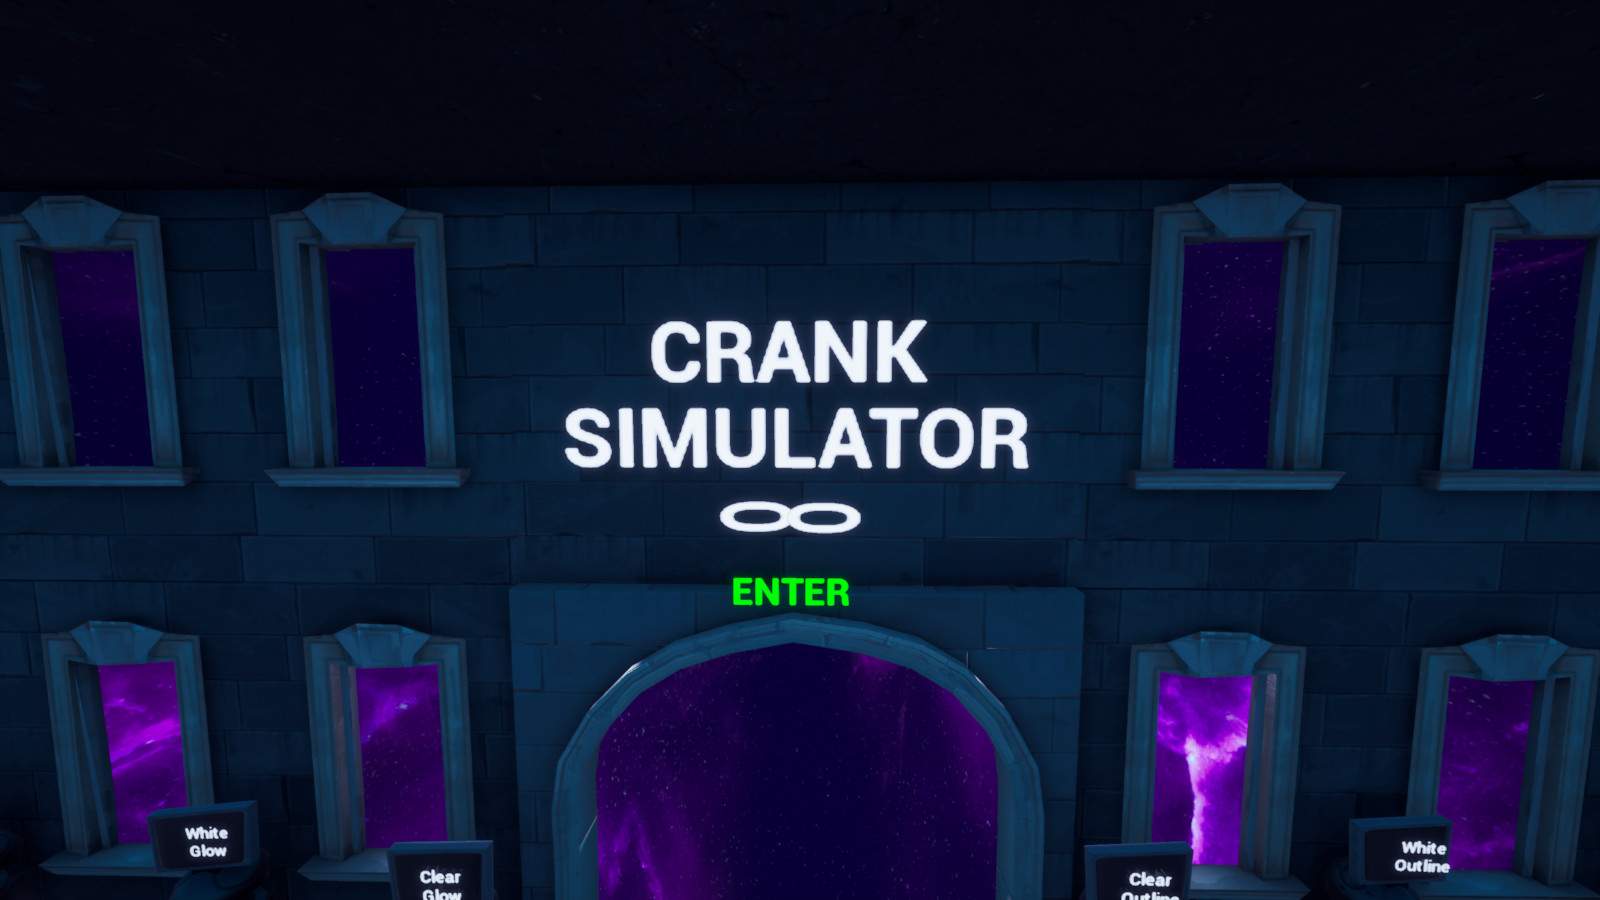 Crank Simulator Infinity free Build Map Fortnite Creative Warm Up Edit Course And Map Code